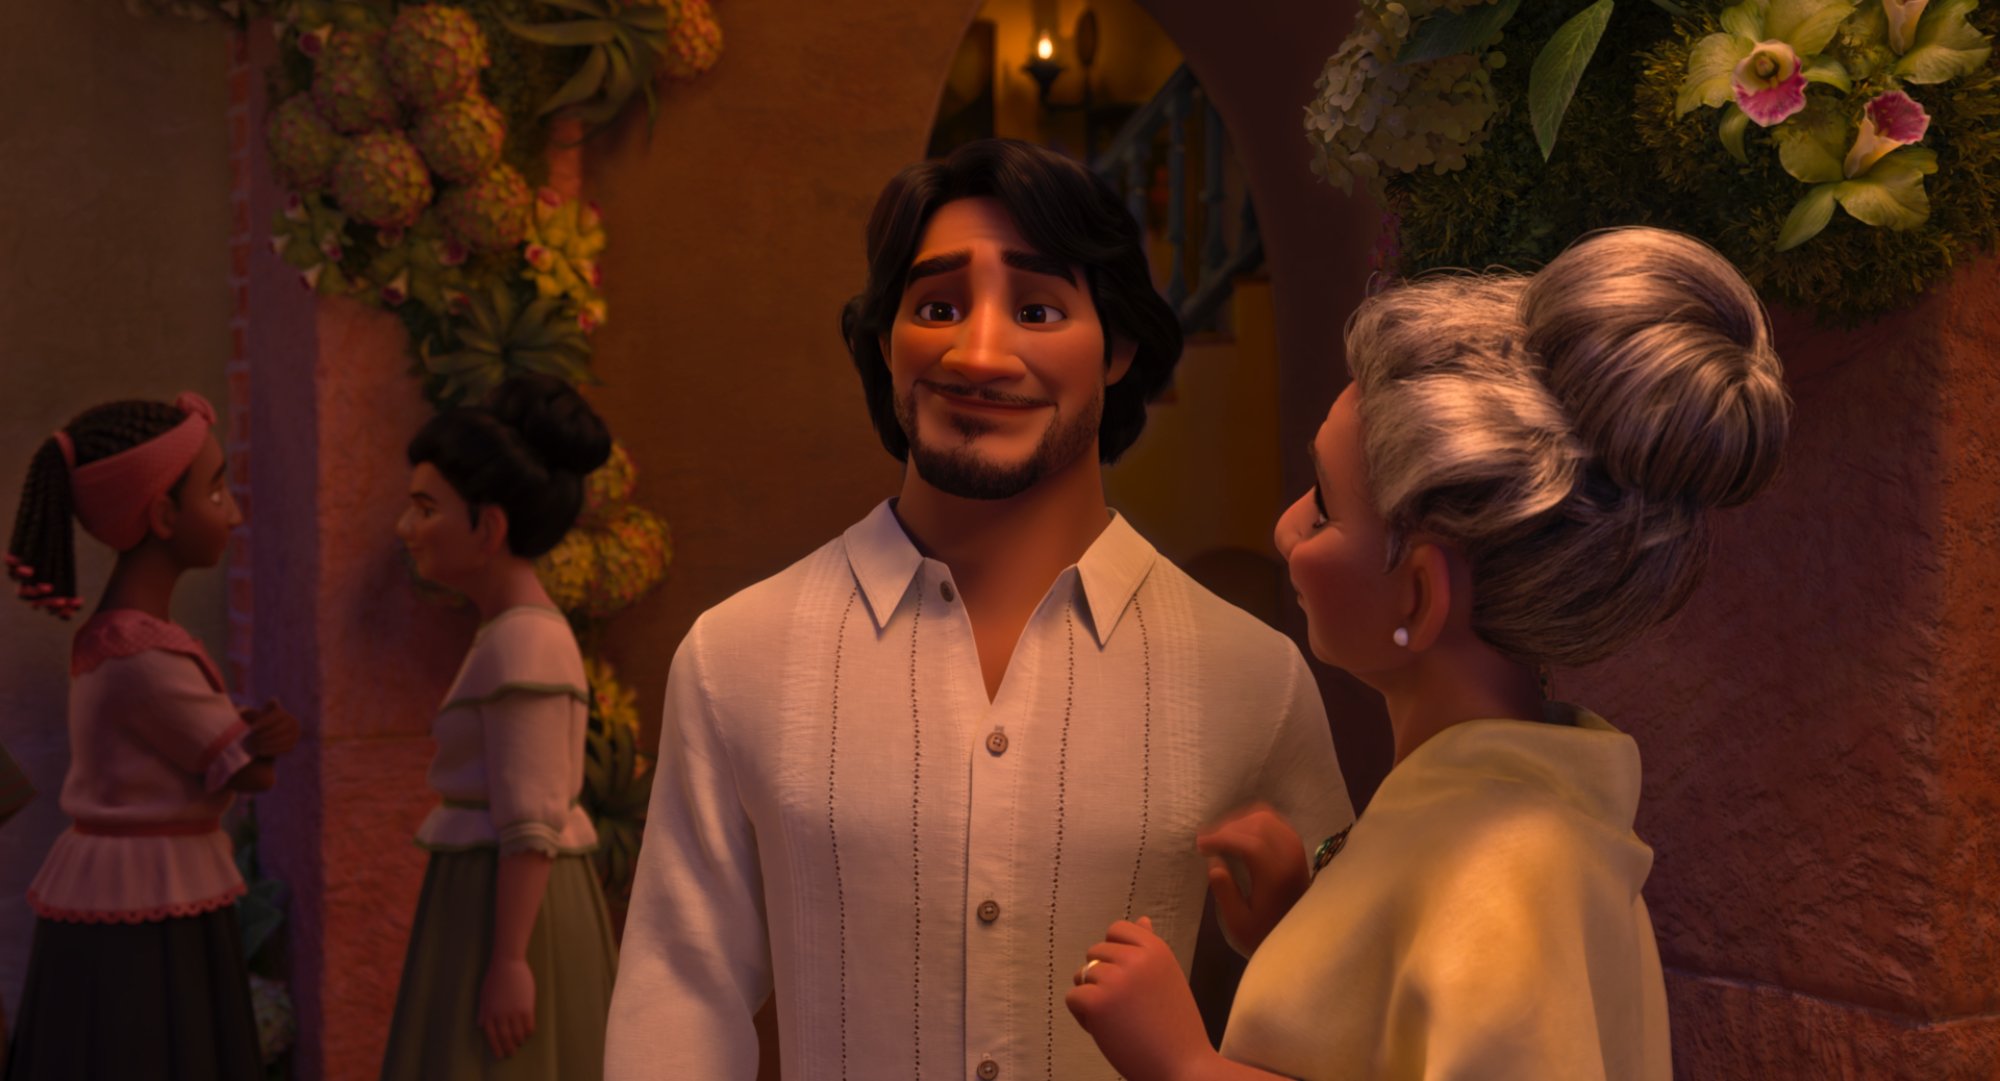 'Encanto' Mariano (voiced by Maluma) smiling wearing a collared shirt